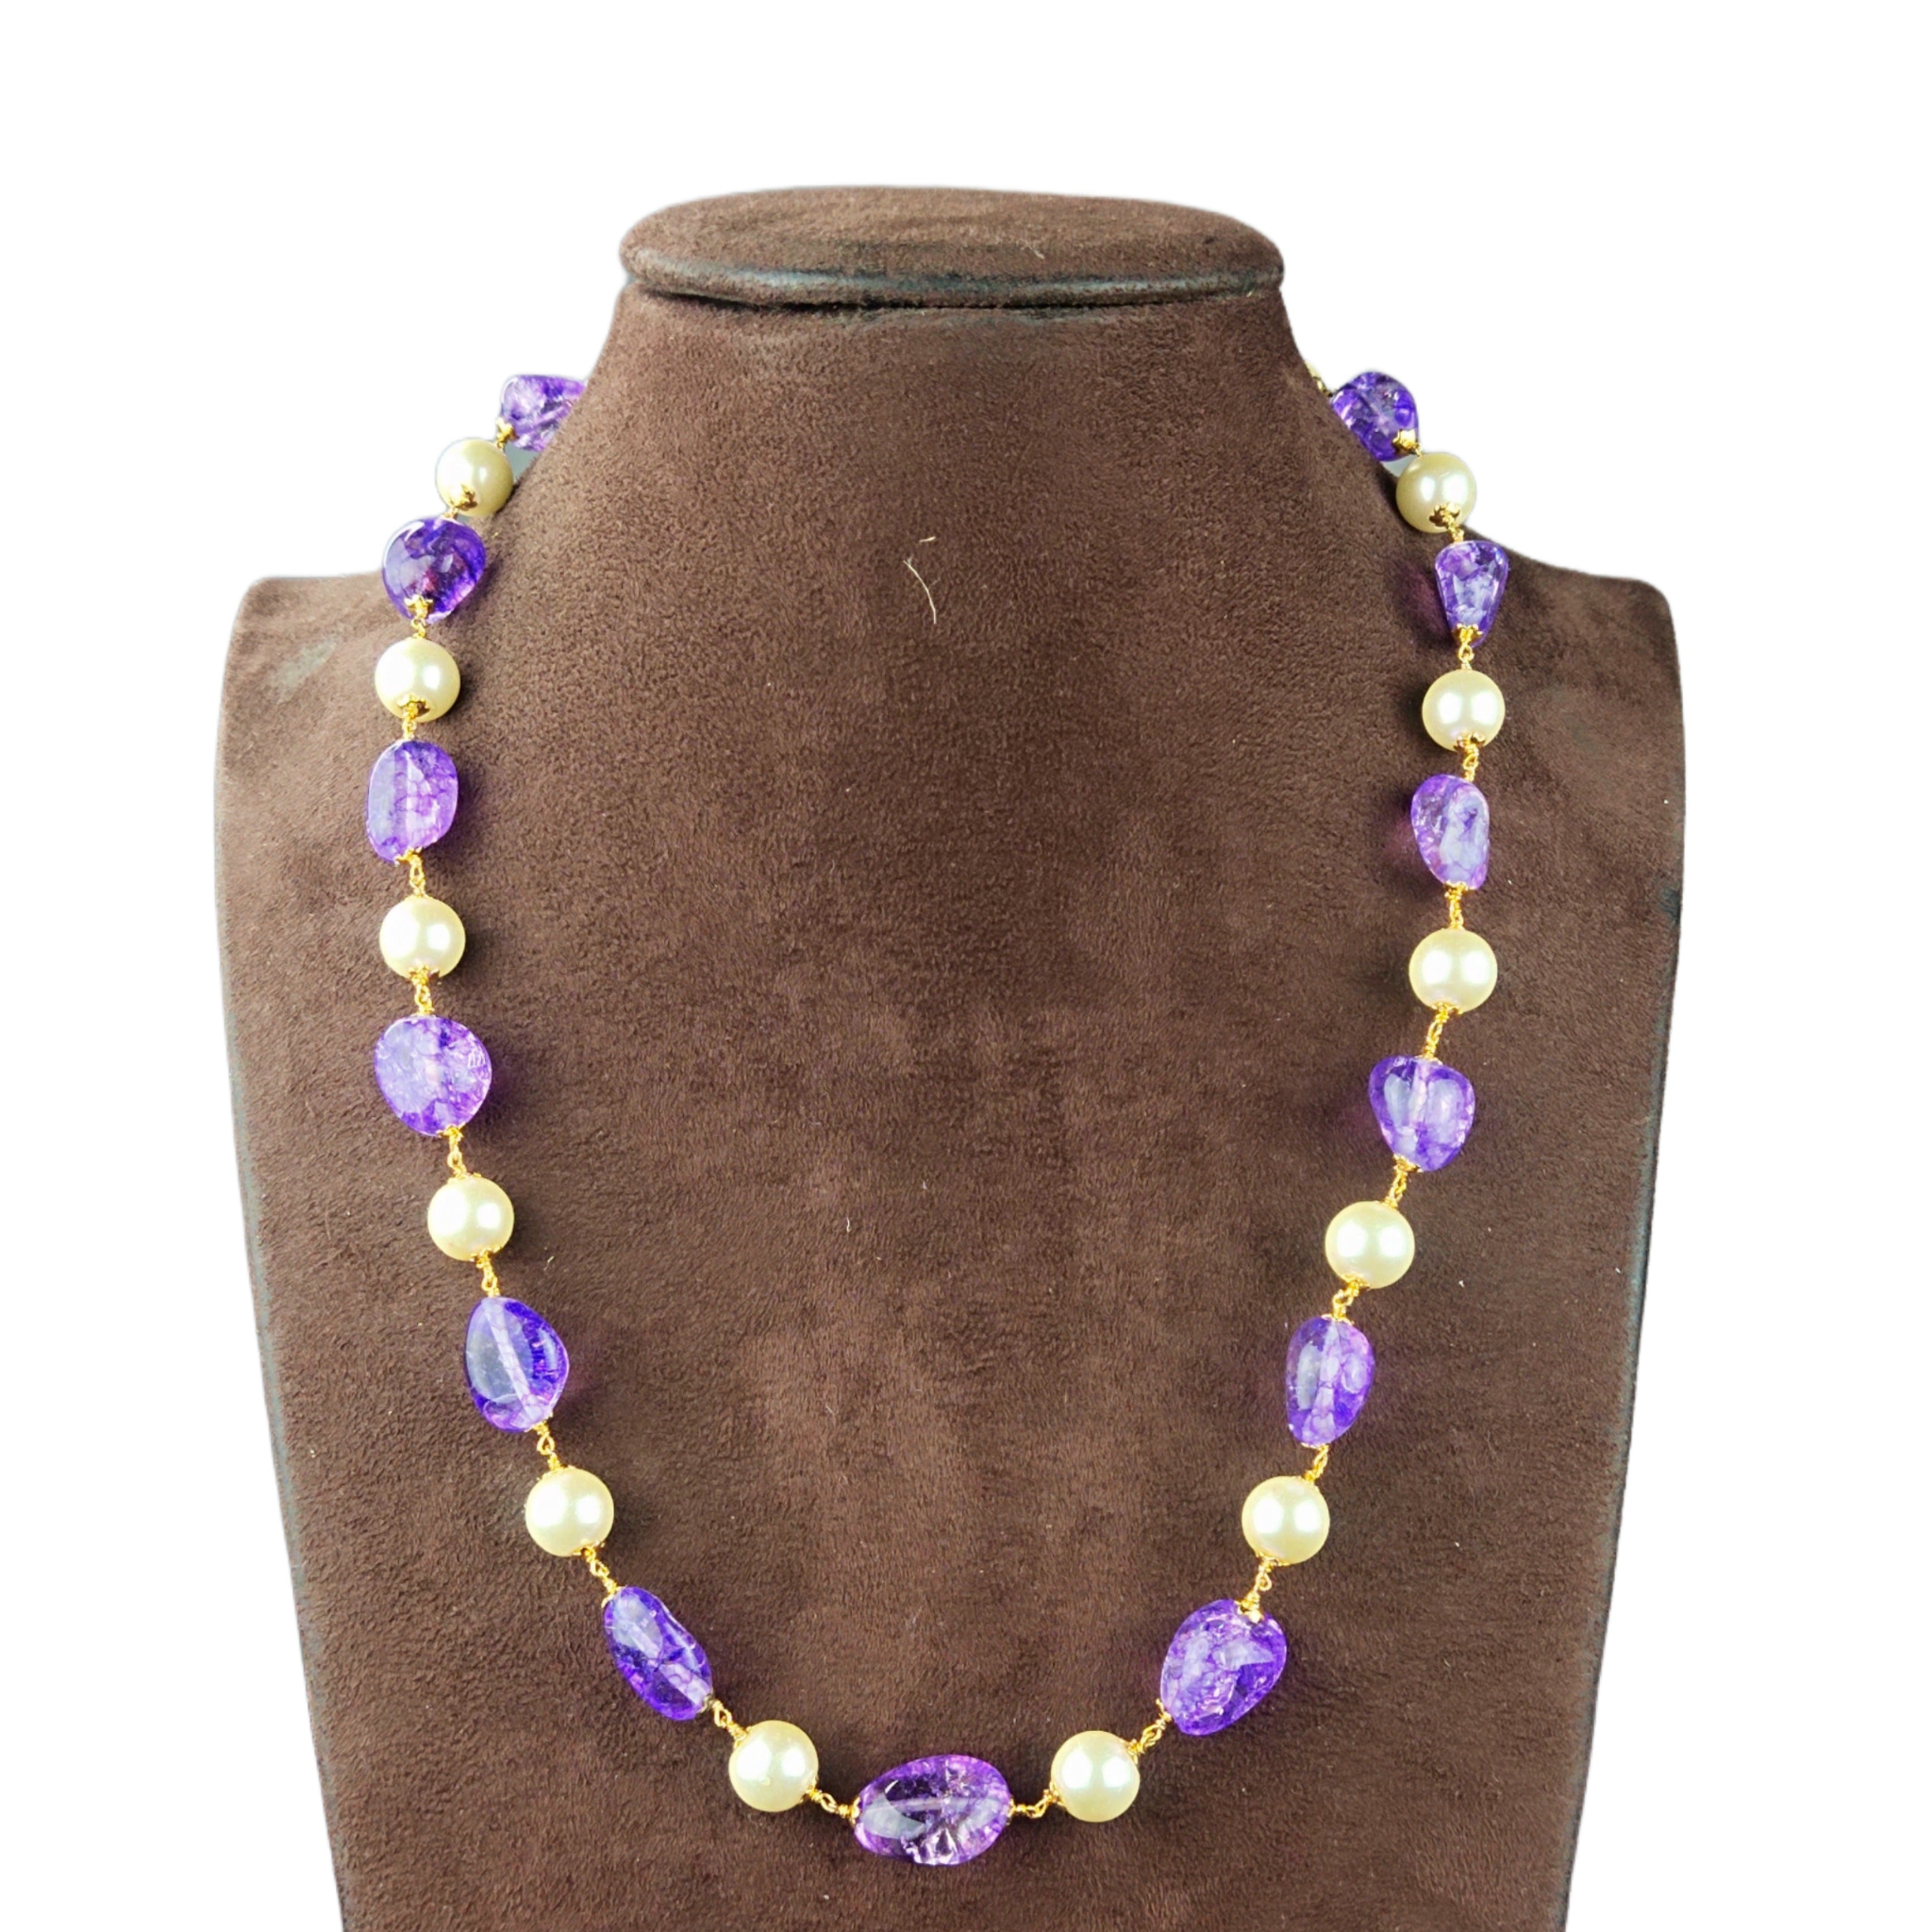 TenThousandThings Beaded Amethyst Spiral Choker Necklace